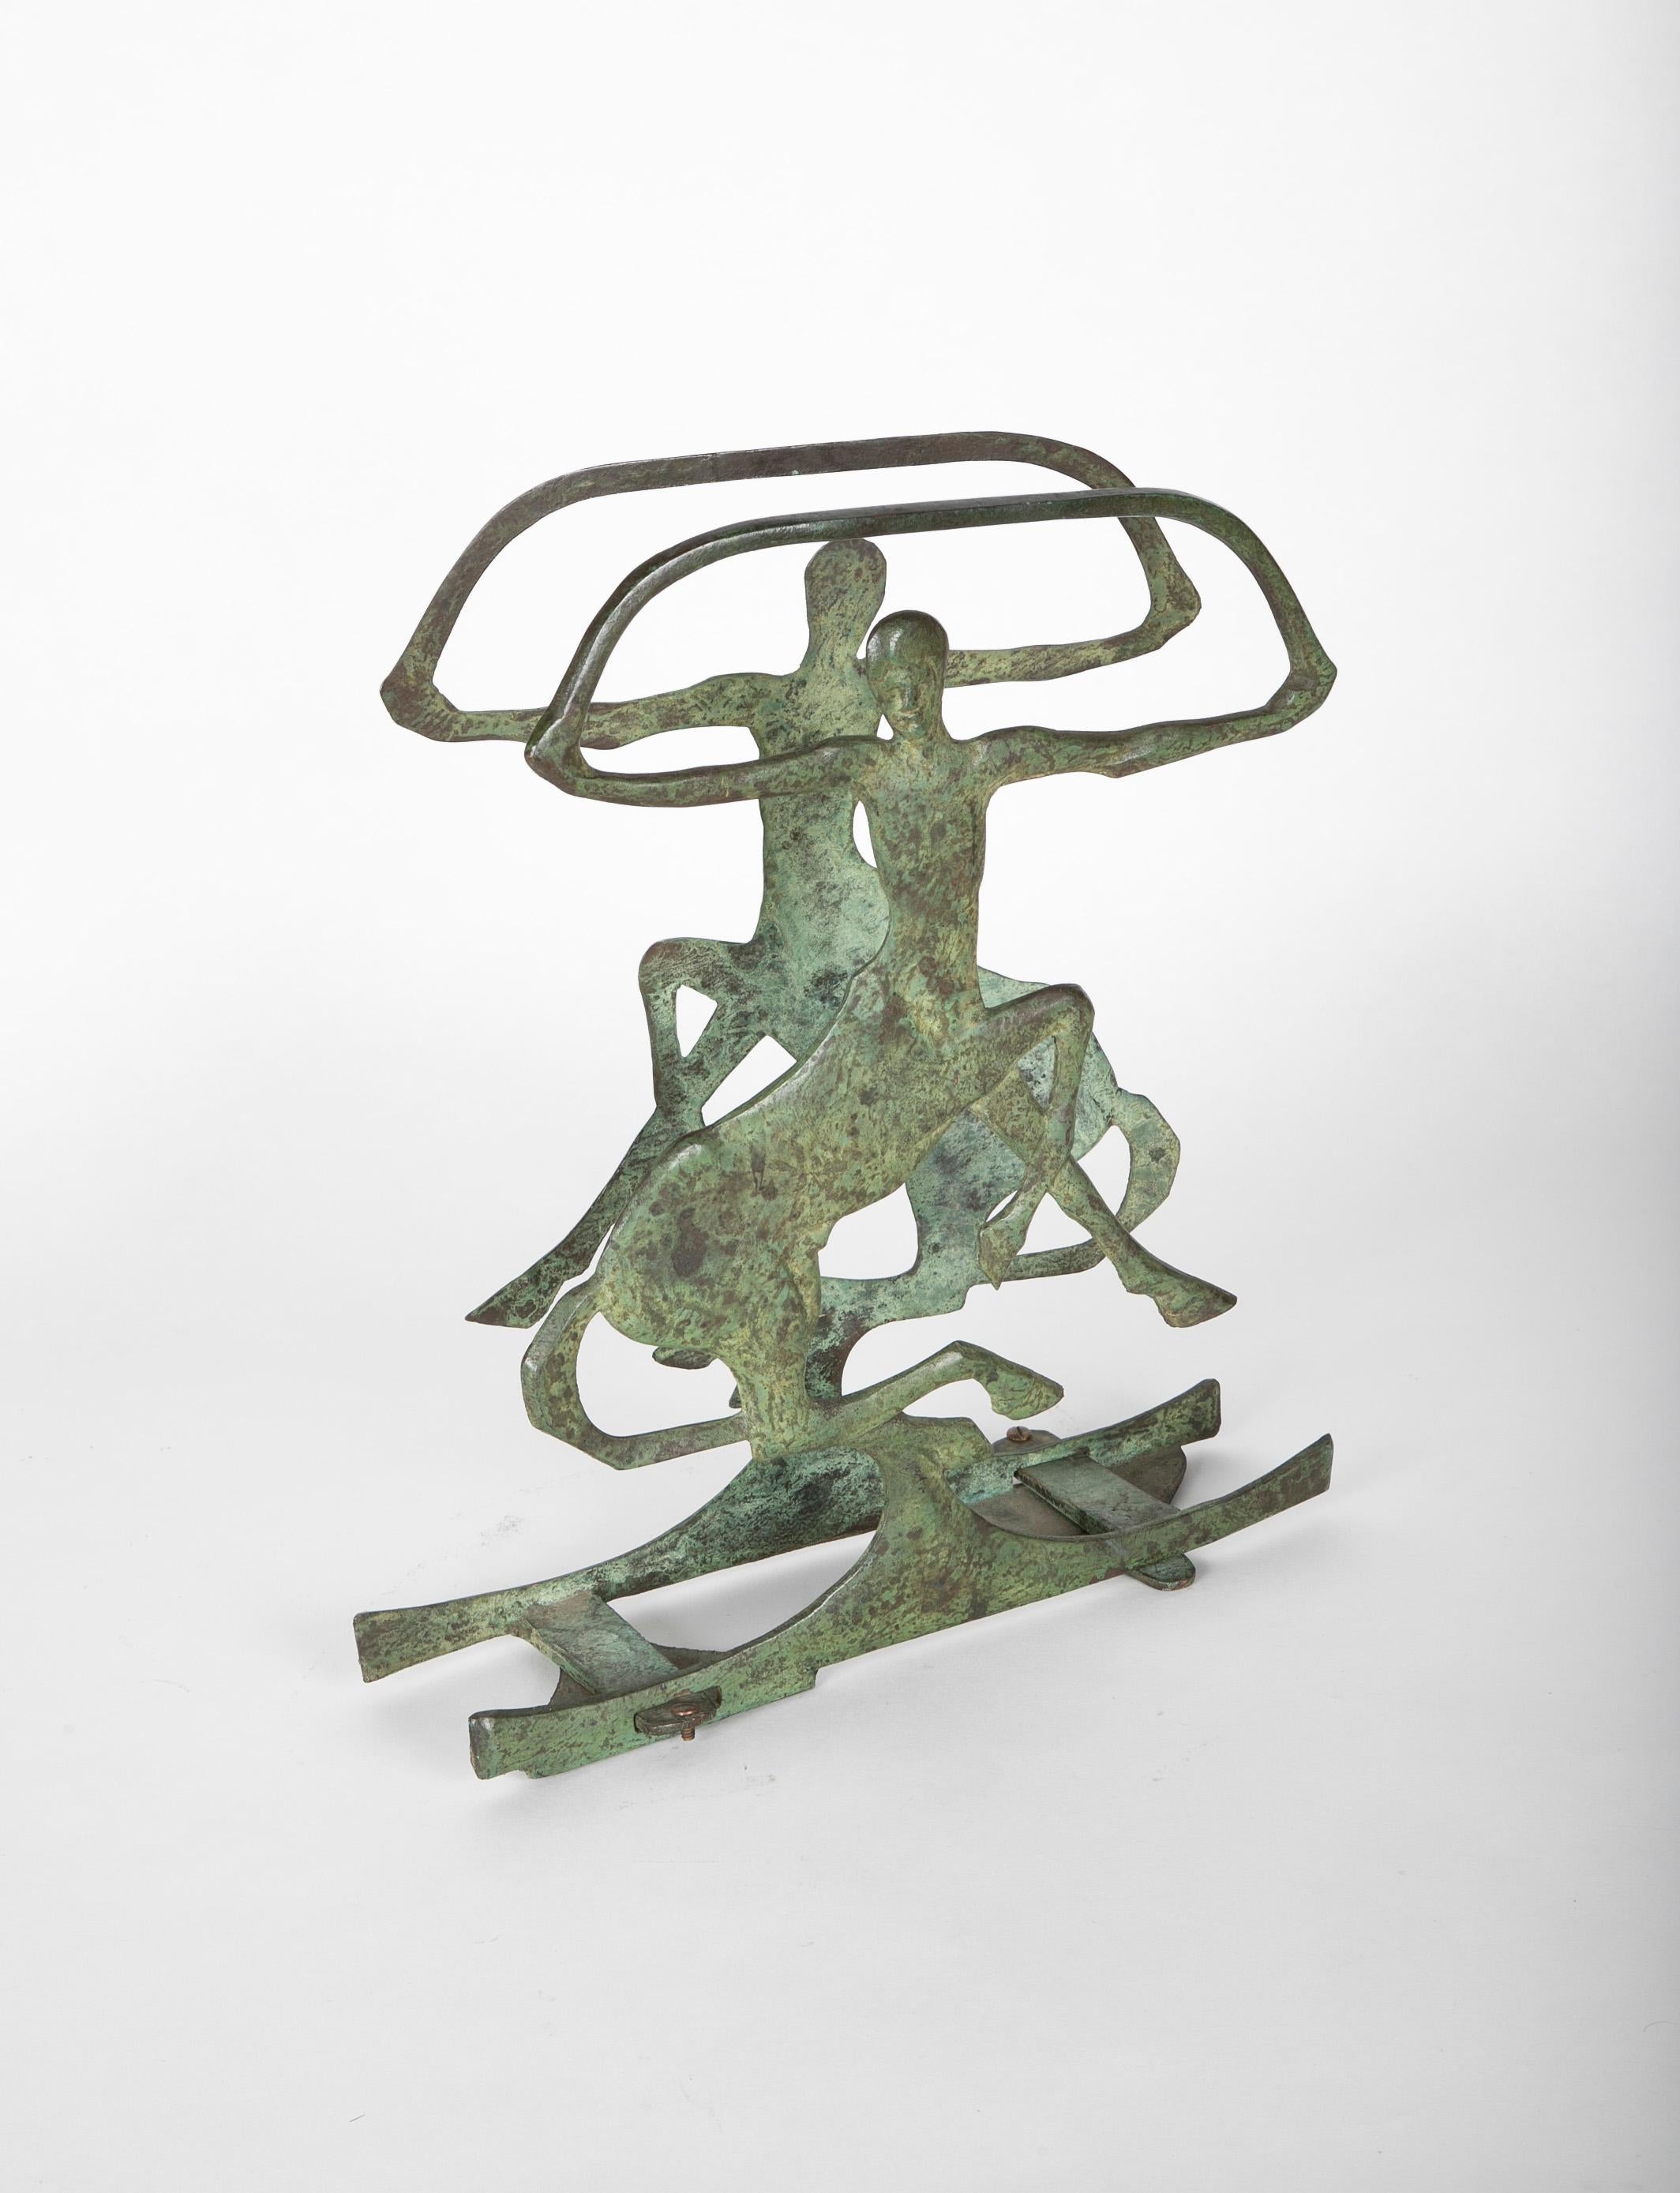 Beautifully designed and very unusual cast bronze magazine of book rack showing two centaurs rearing and with arms out stretched, with subtle verdigris patina. 
Whether used as a holder for magazines or just a unique piece of sculpture, this is a